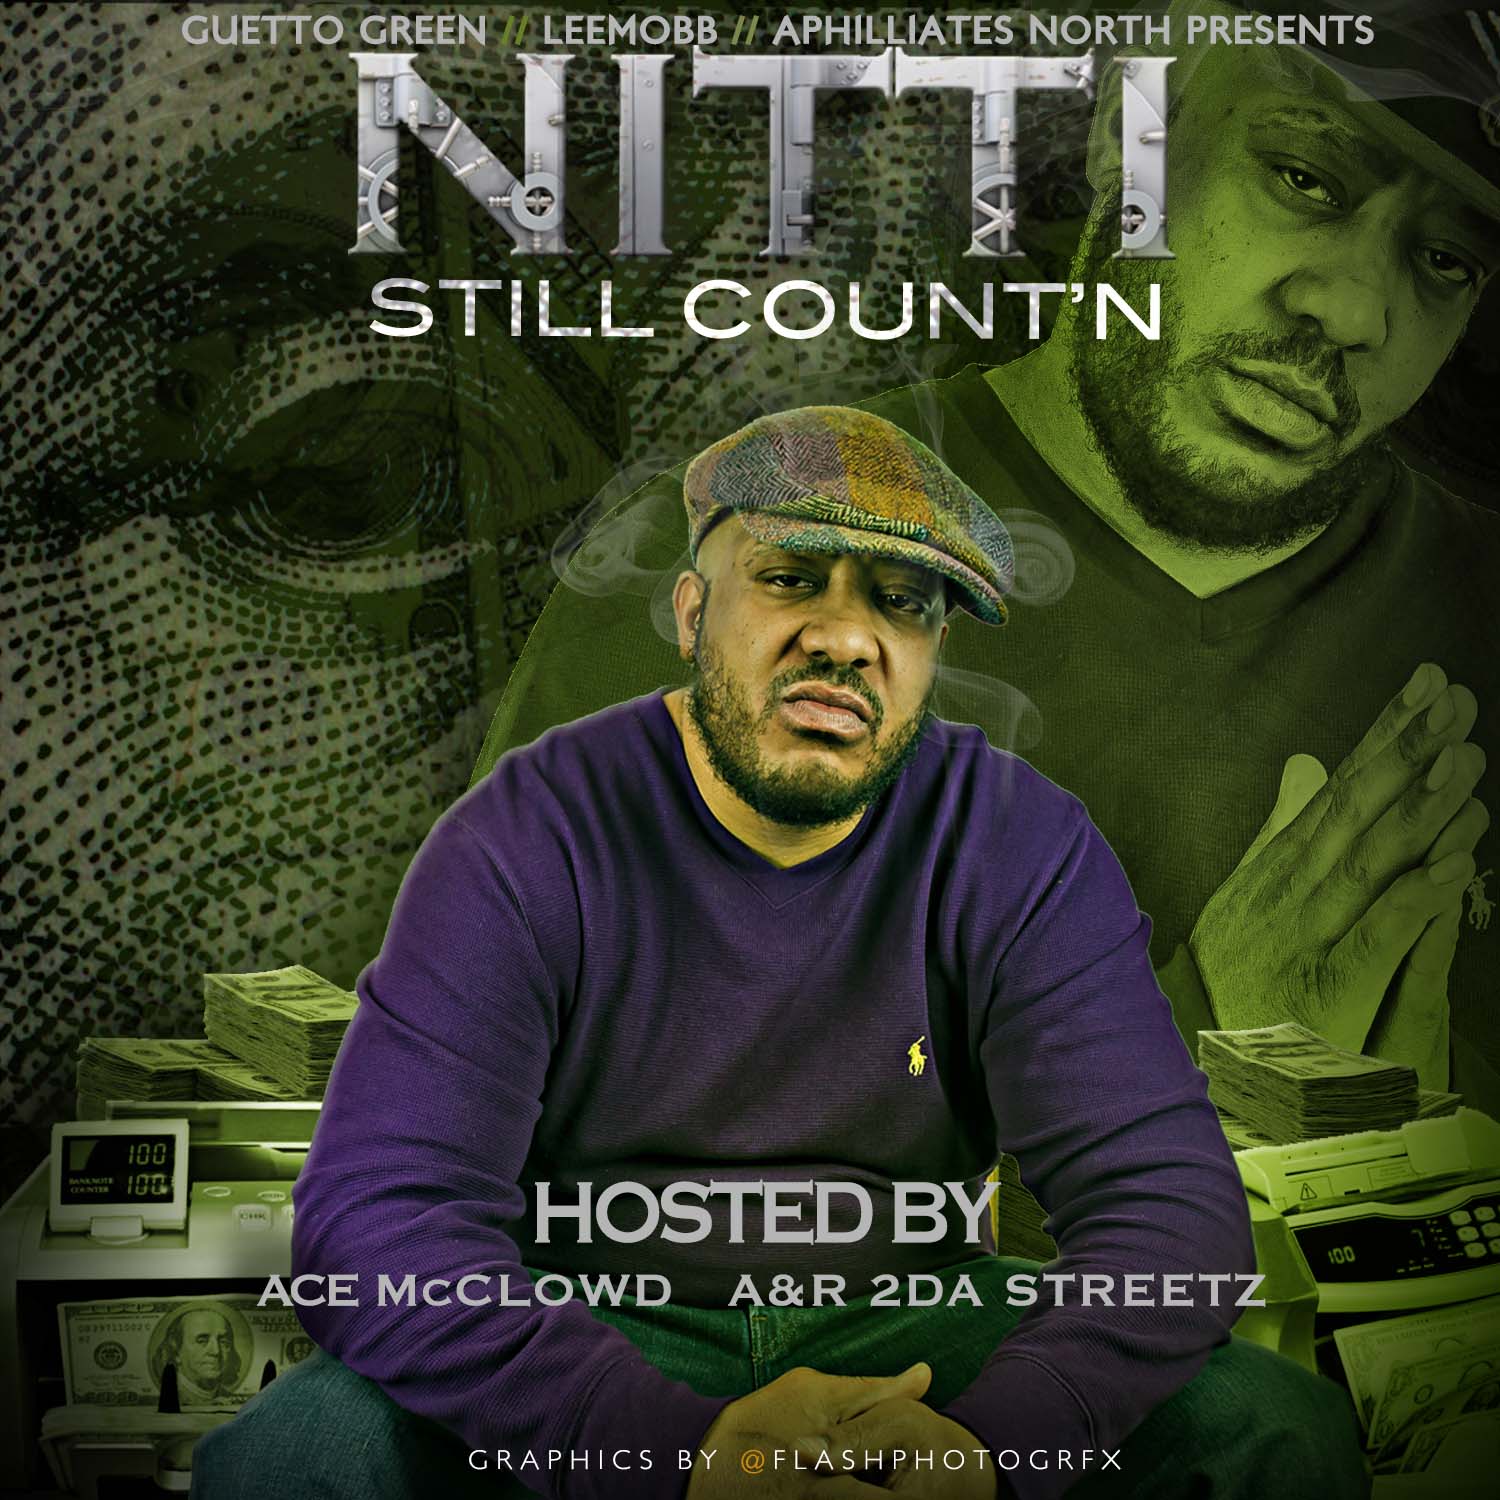 Nitti-front-cover1 Nitti - Still Count'n (Mixtape) (Hosted by Ace McClowd & Gillie Da Kid)  